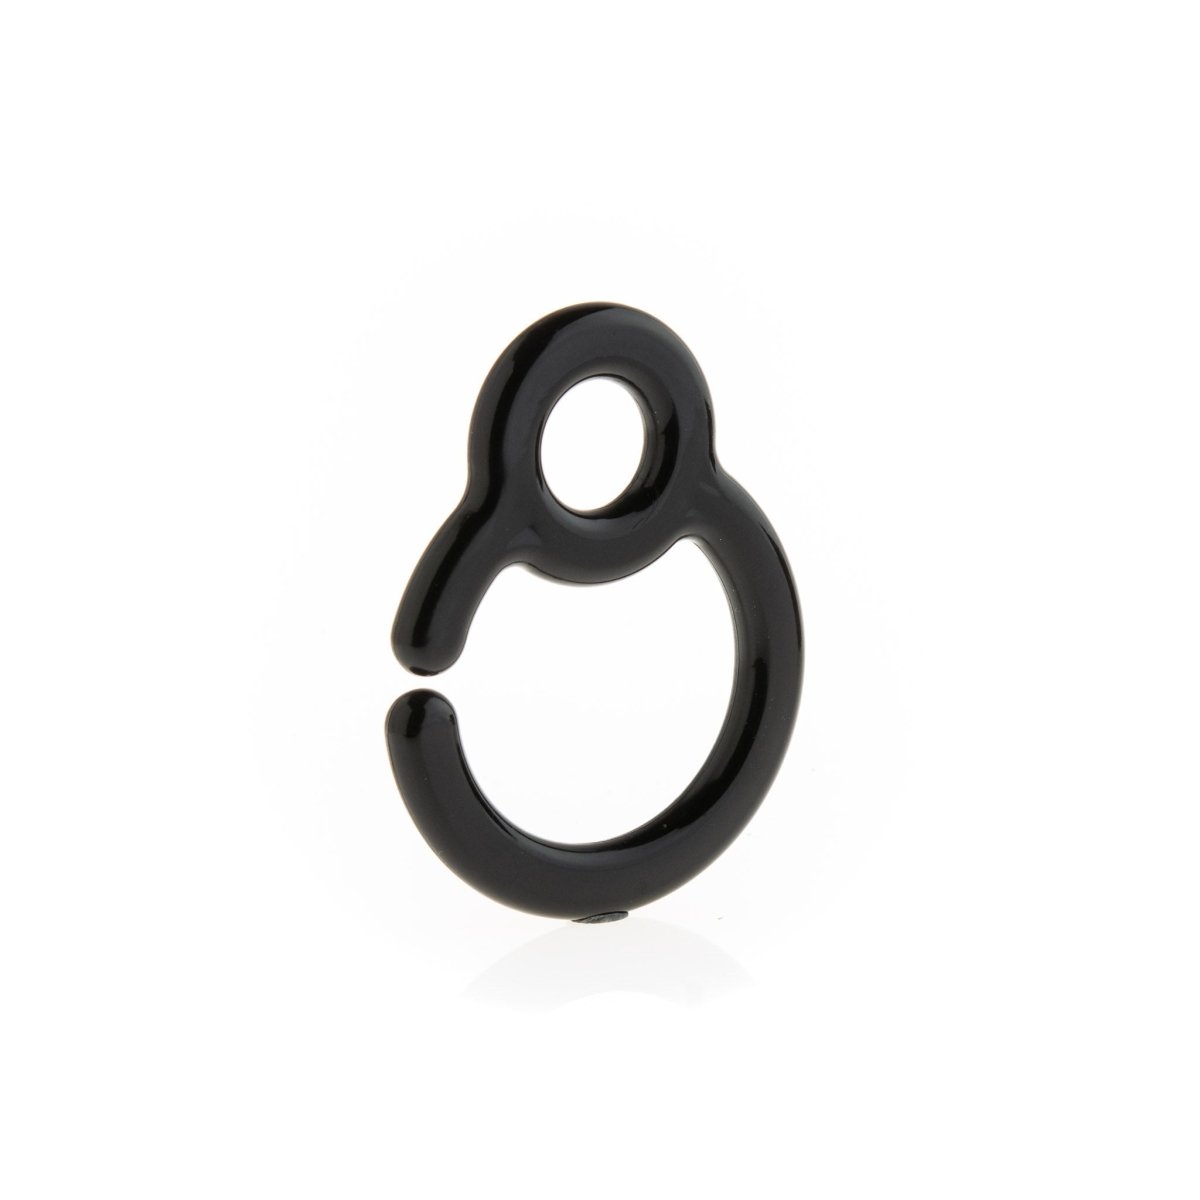 Accessories Stroller Clip Attachments Black from Cara & Co Craft Supply